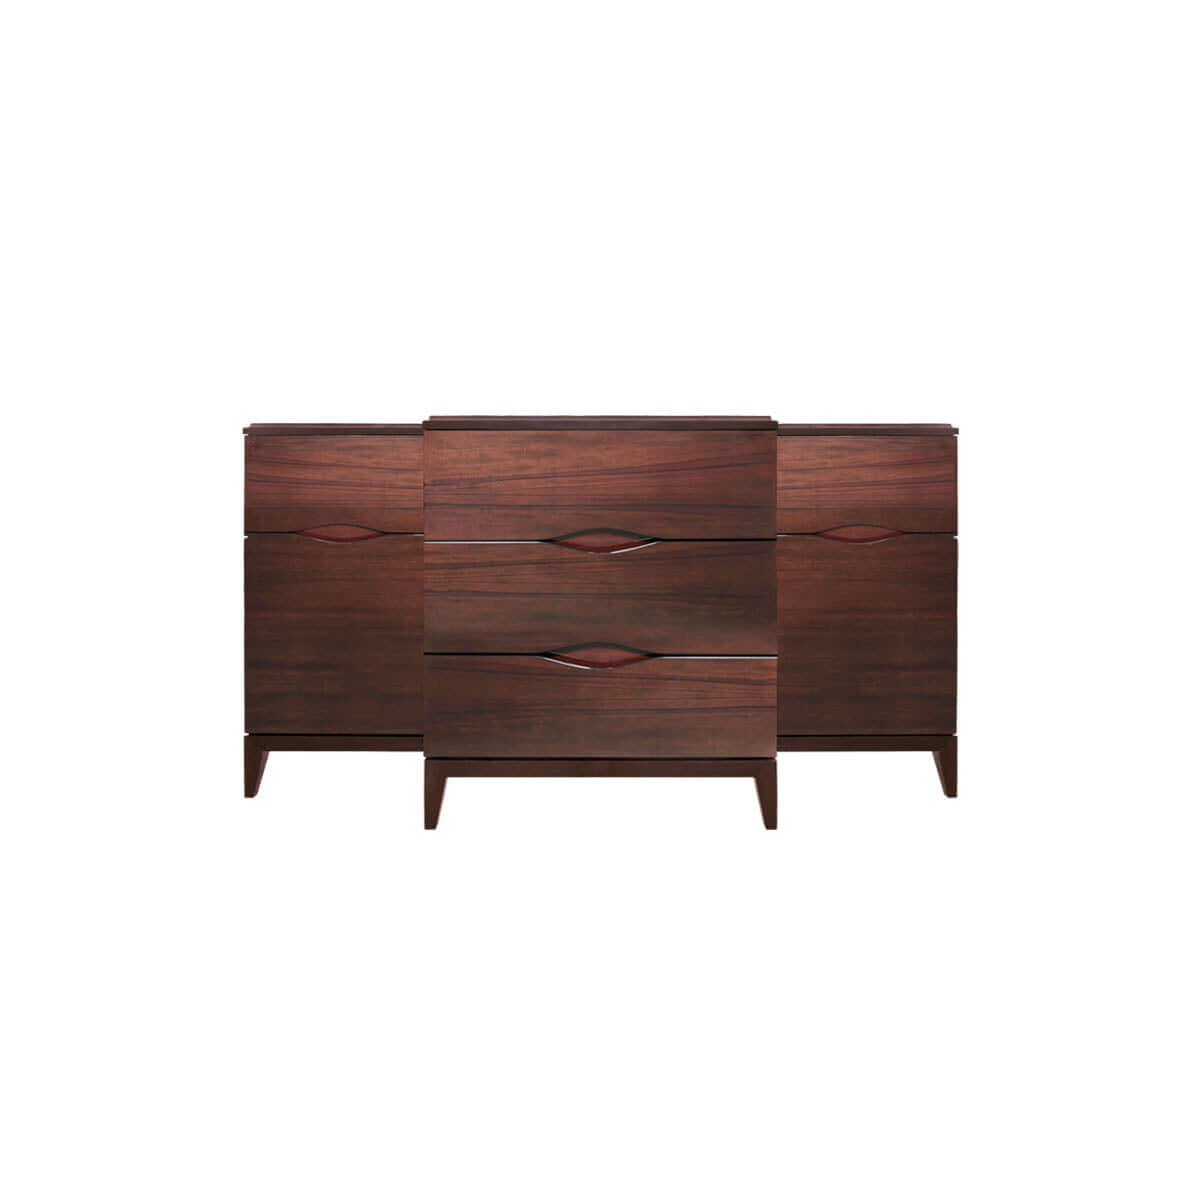 indonesian furniture online - glossy brown sideboard with 9 drawers